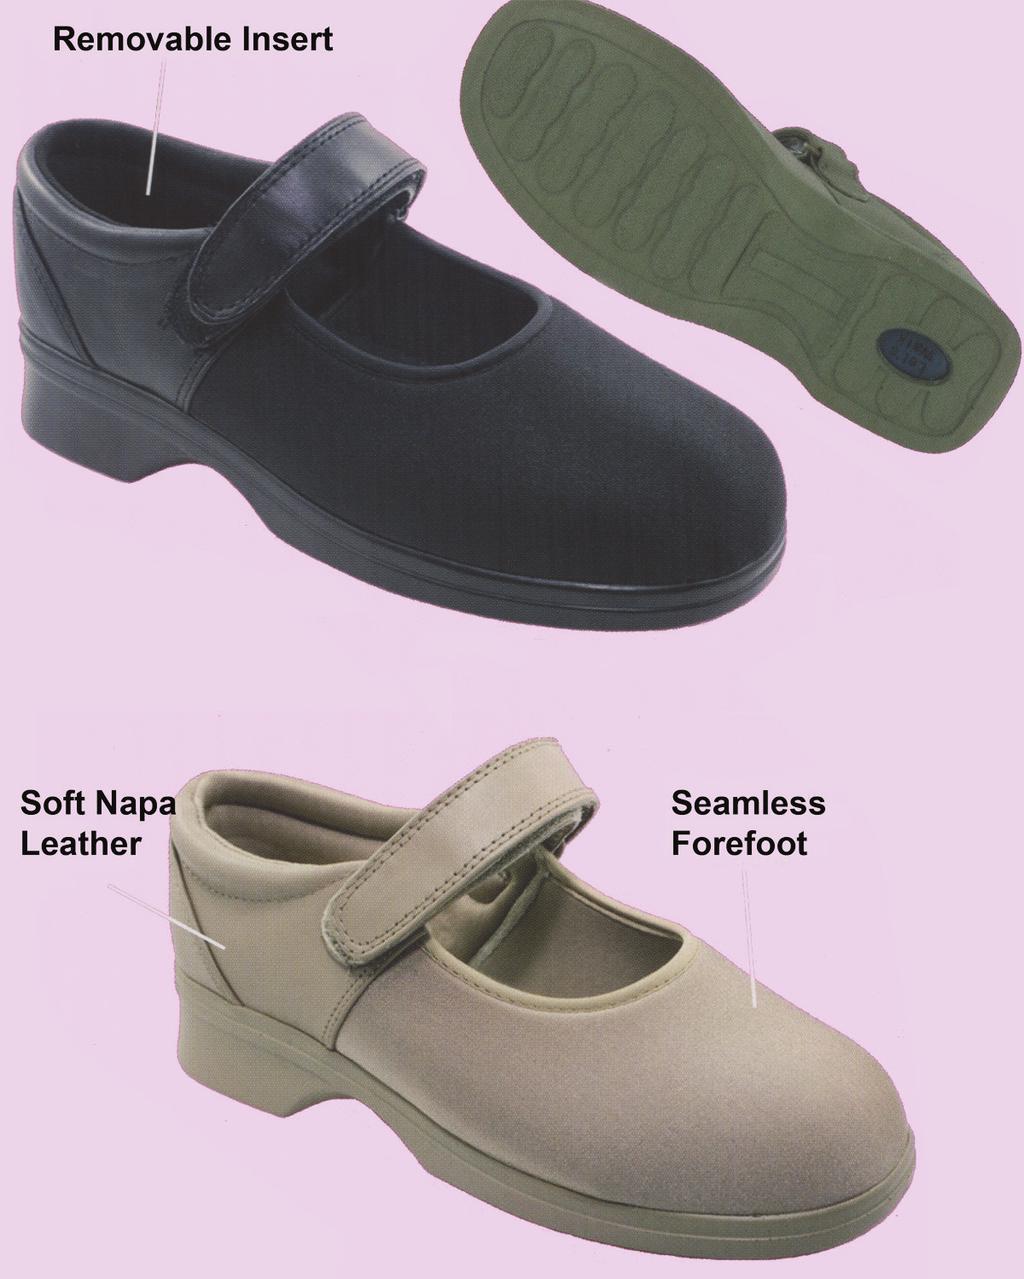 PEDORS MARY JANE The Mary Jane has a Euro look with all the comfort and wellness associated with the Pedorsbrand.